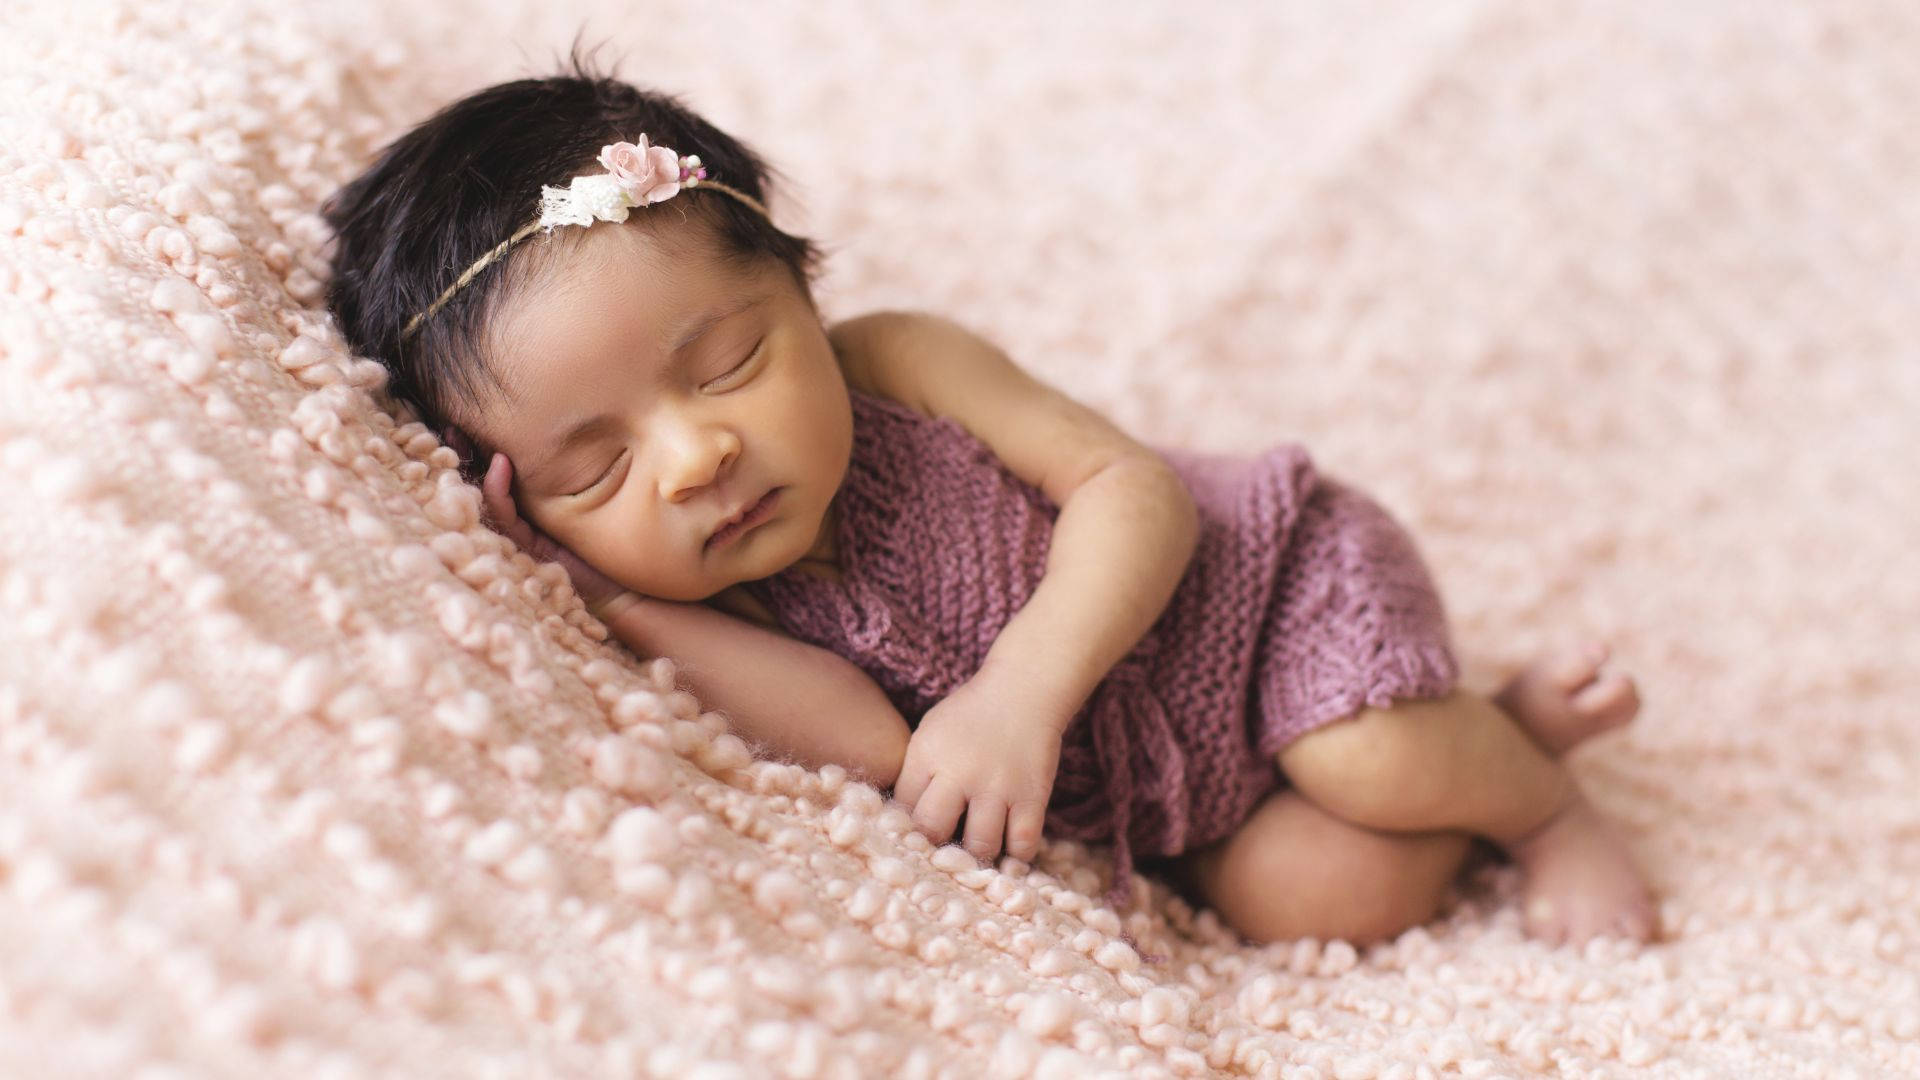 Baby Photography With Pink Crochet Dress Wallpaper